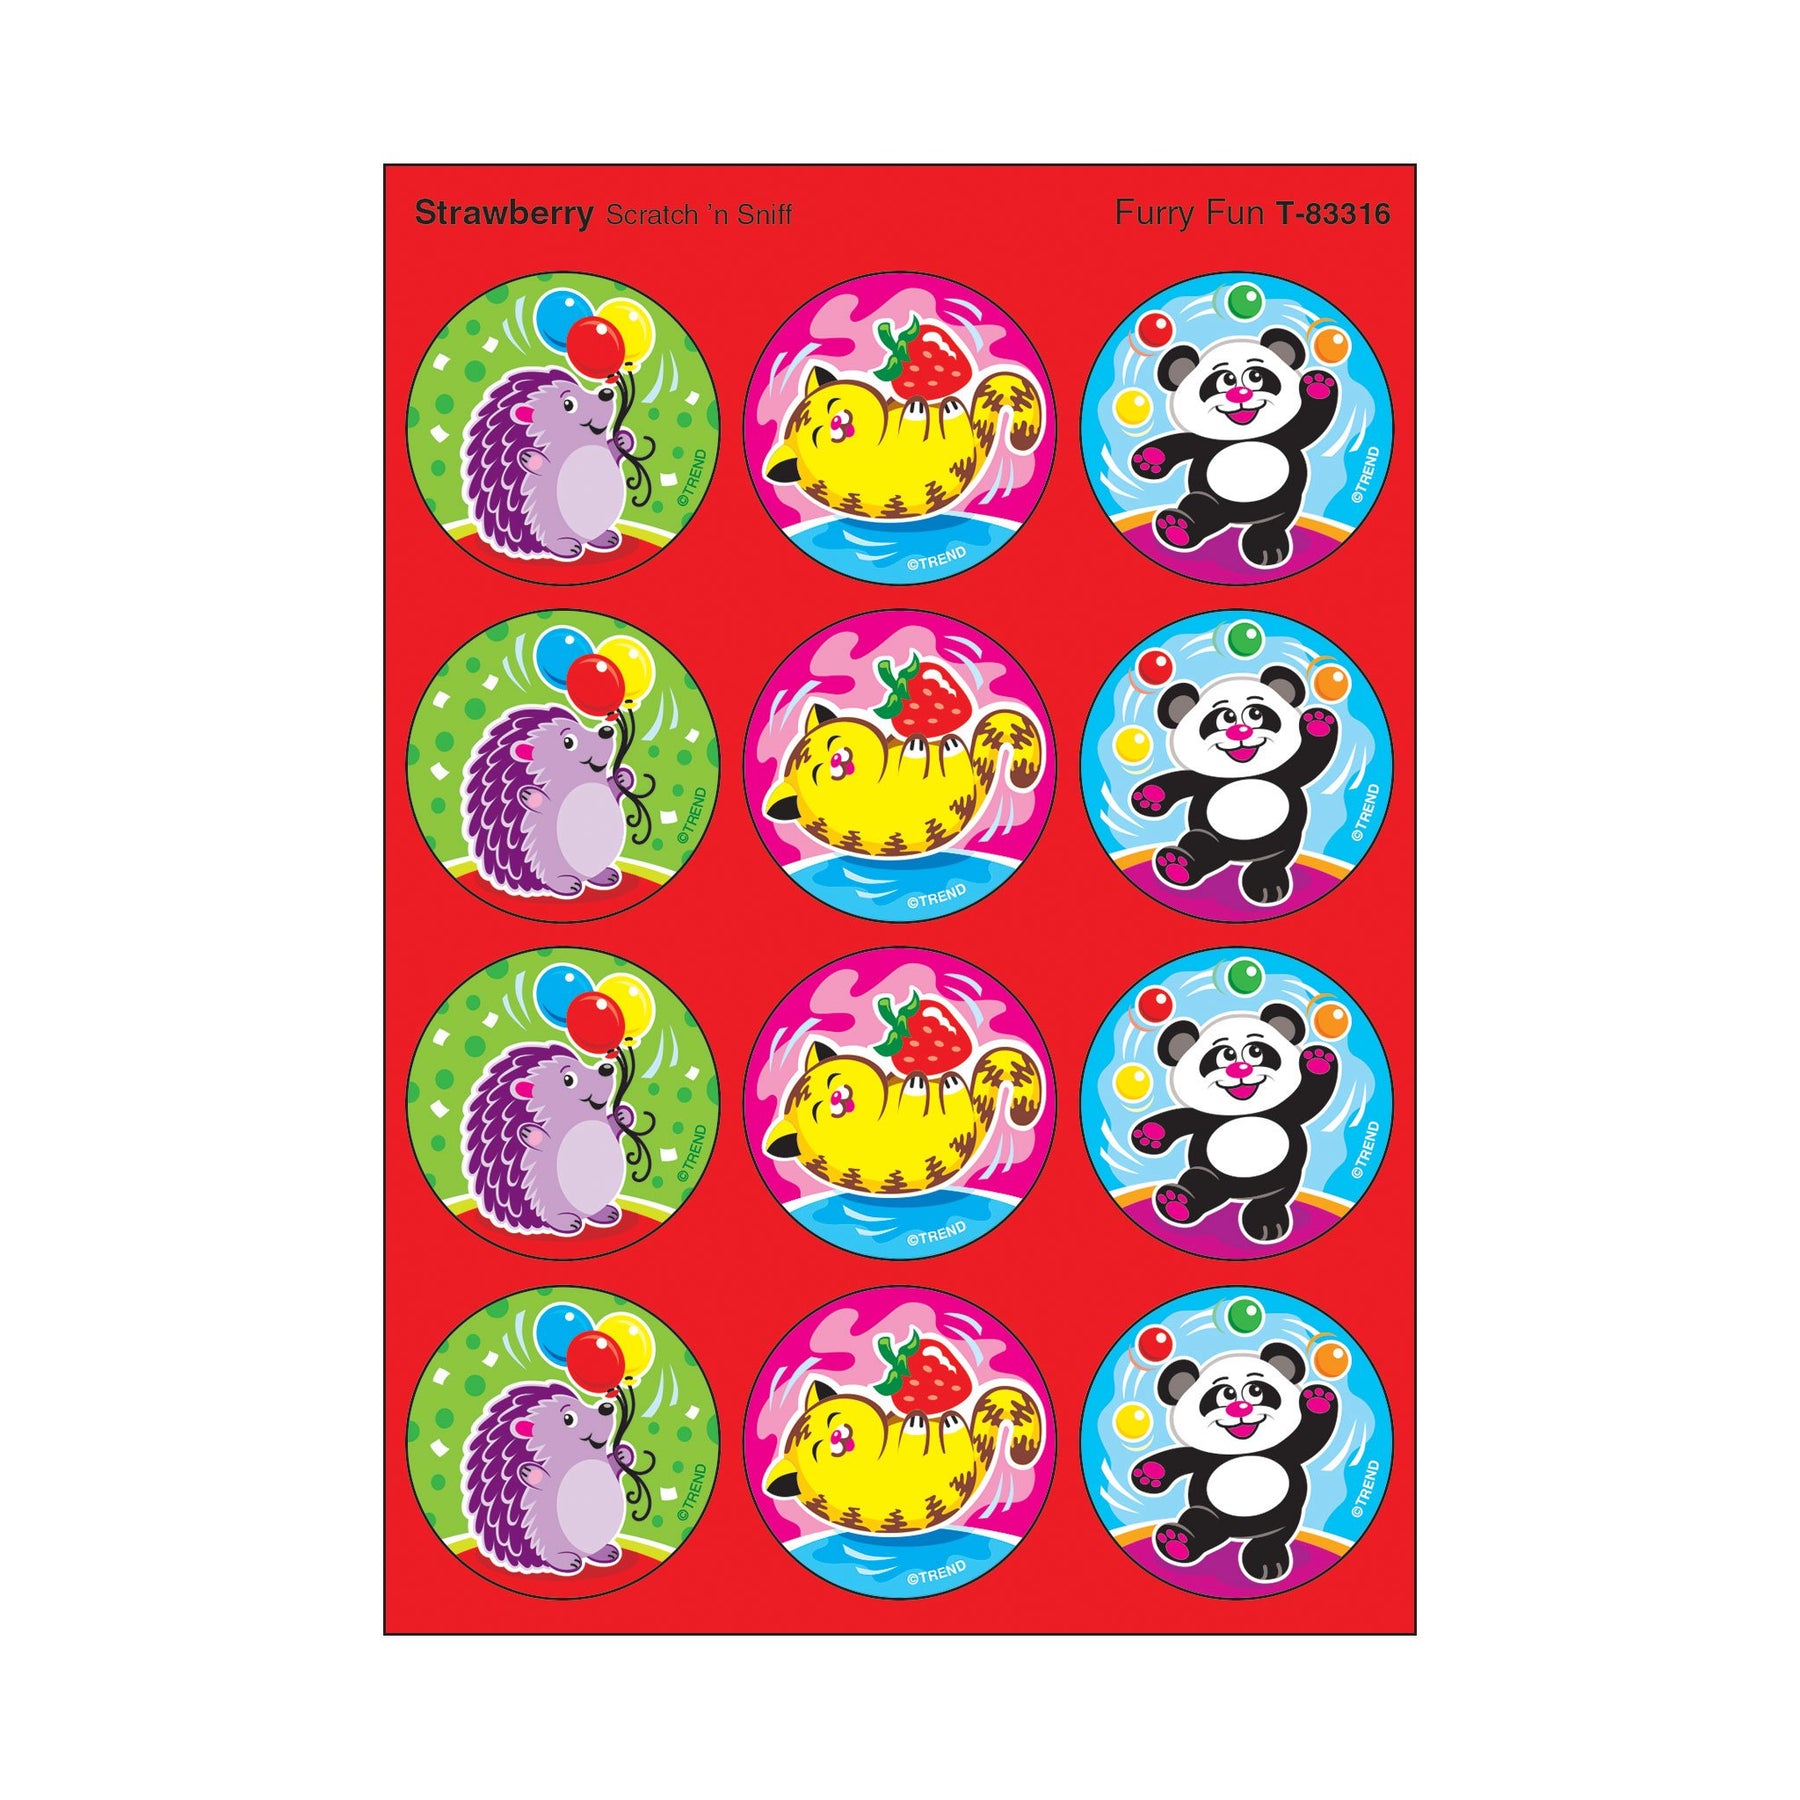 Trend T83316 Scratch and Sniff Stickers Furry Fun (Strawberry)